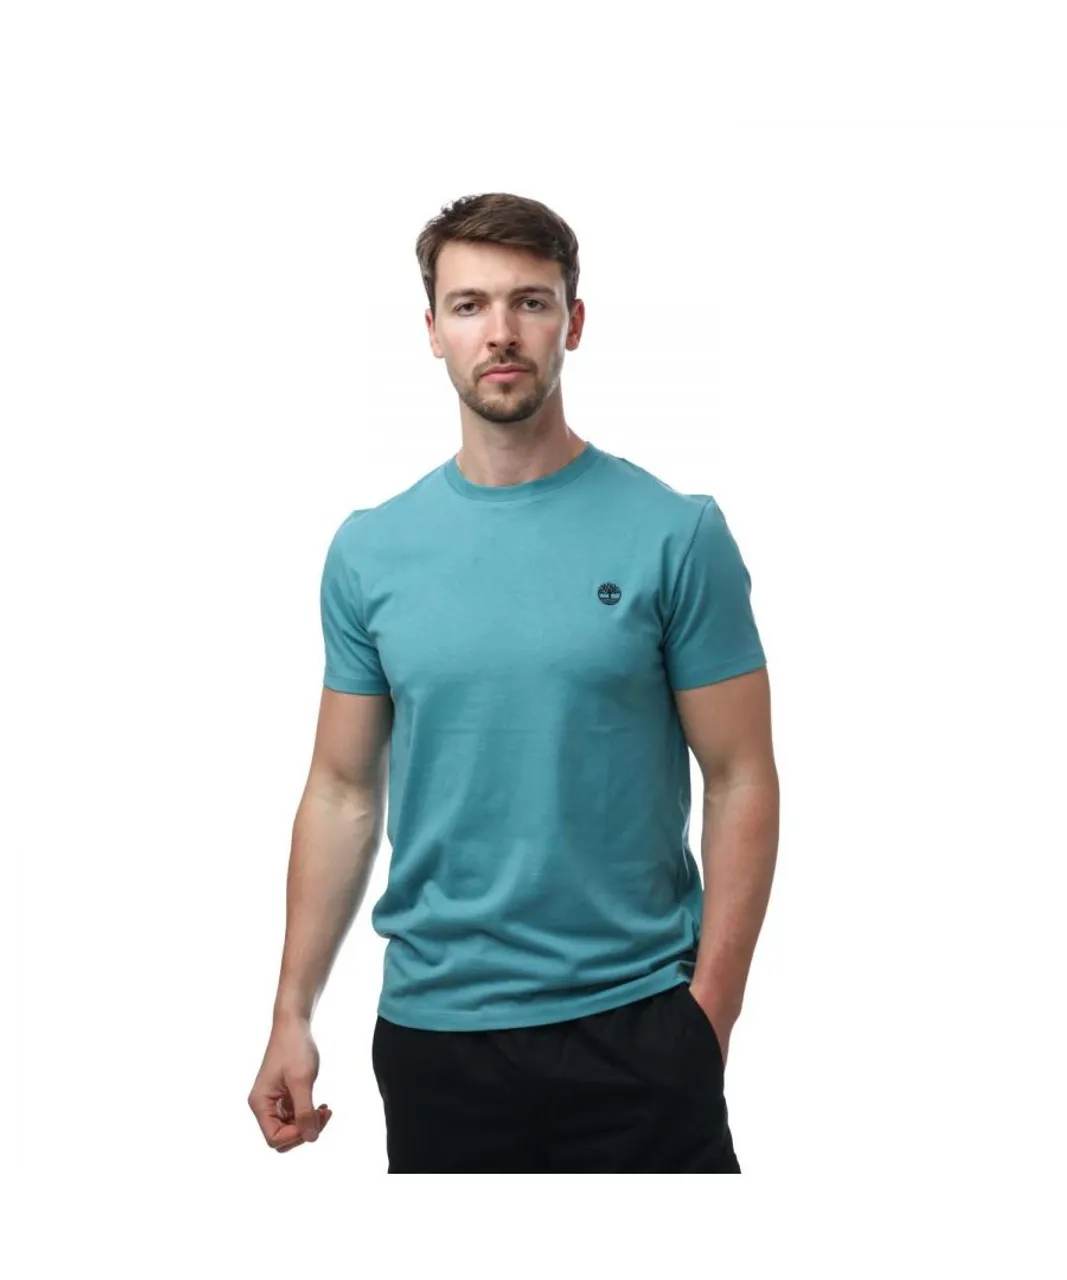 Timberland Mens Dustan River T-Shirt in Blue Cotton